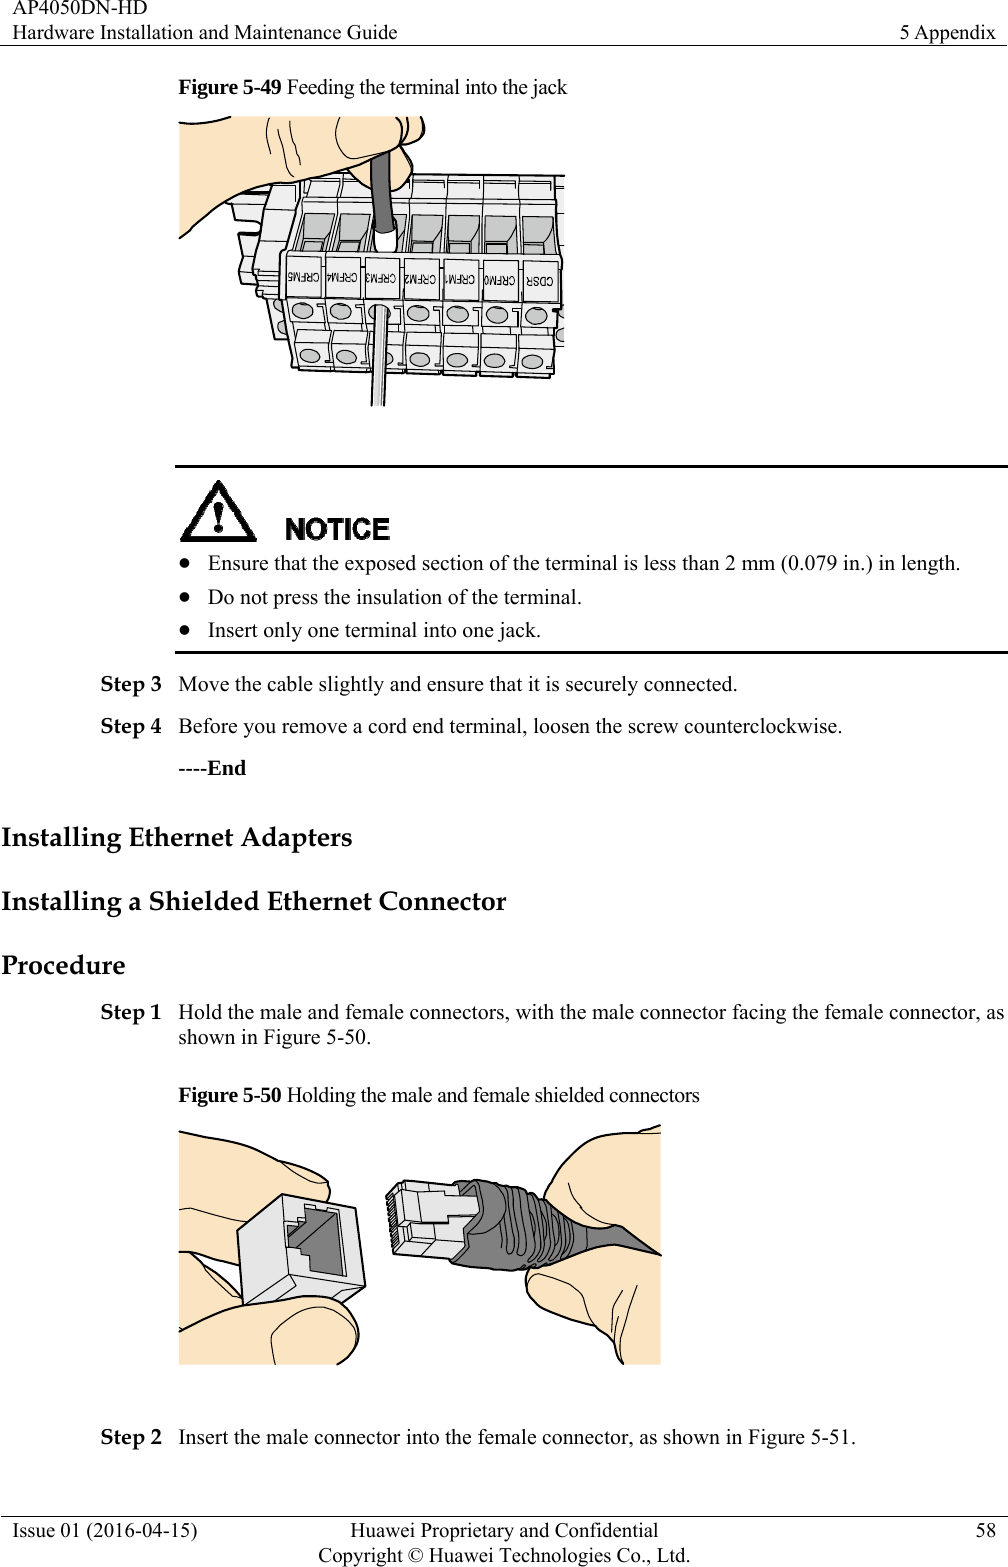 AP4050DN-HD Hardware Installation and Maintenance Guide  5 Appendix Issue 01 (2016-04-15)  Huawei Proprietary and Confidential         Copyright © Huawei Technologies Co., Ltd.58 Figure 5-49 Feeding the terminal into the jack     Ensure that the exposed section of the terminal is less than 2 mm (0.079 in.) in length.  Do not press the insulation of the terminal.  Insert only one terminal into one jack. Step 3 Move the cable slightly and ensure that it is securely connected. Step 4 Before you remove a cord end terminal, loosen the screw counterclockwise. ----End Installing Ethernet Adapters Installing a Shielded Ethernet Connector Procedure Step 1 Hold the male and female connectors, with the male connector facing the female connector, as shown in Figure 5-50. Figure 5-50 Holding the male and female shielded connectors   Step 2 Insert the male connector into the female connector, as shown in Figure 5-51. 